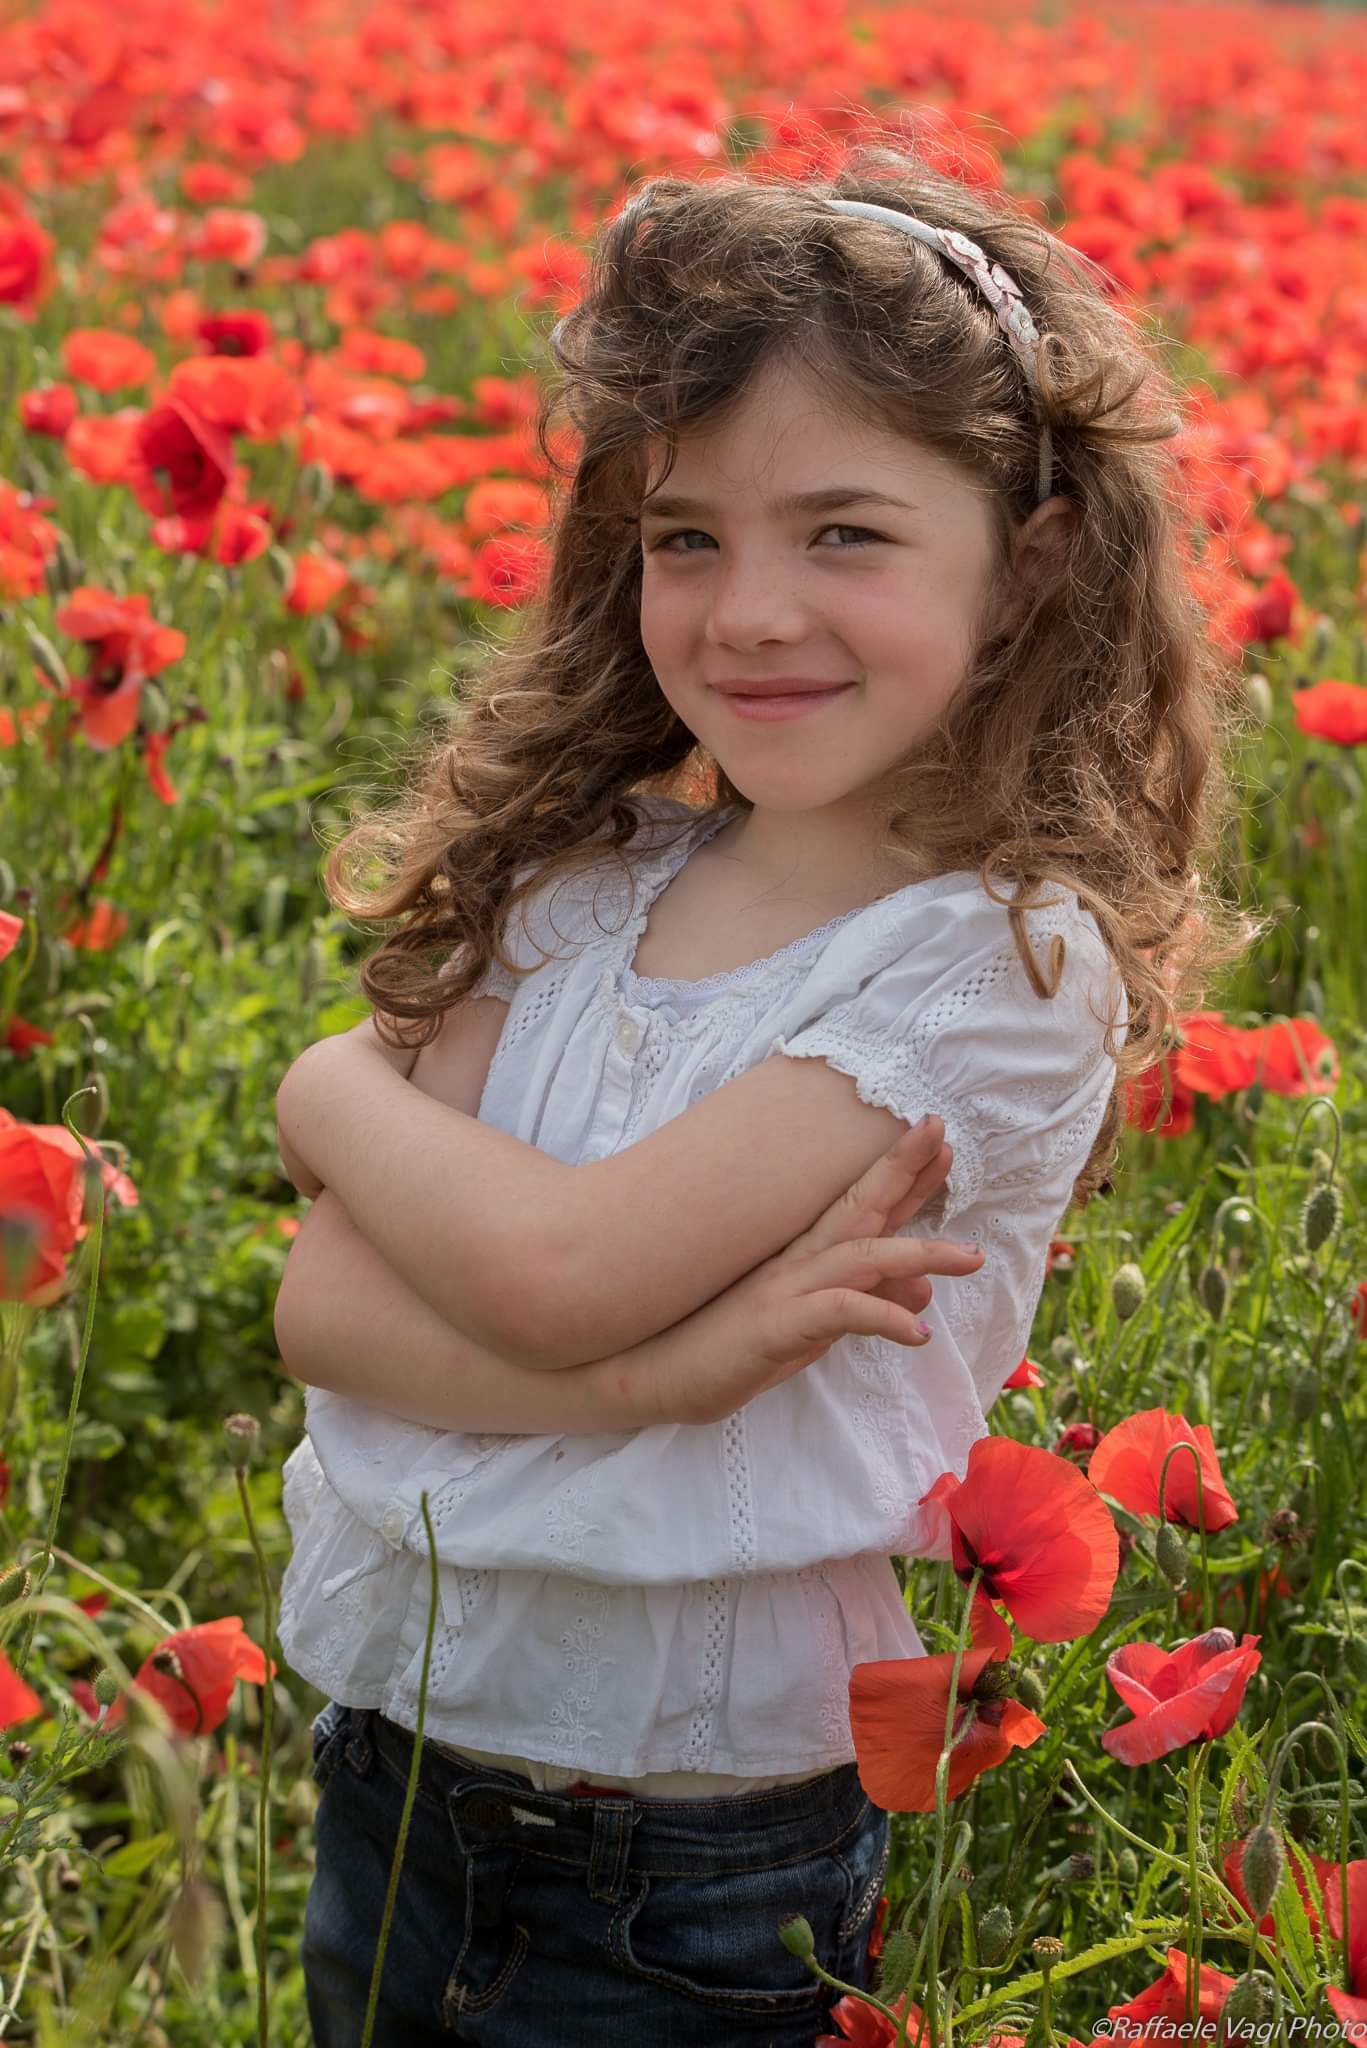 Vanessa and the poppies...